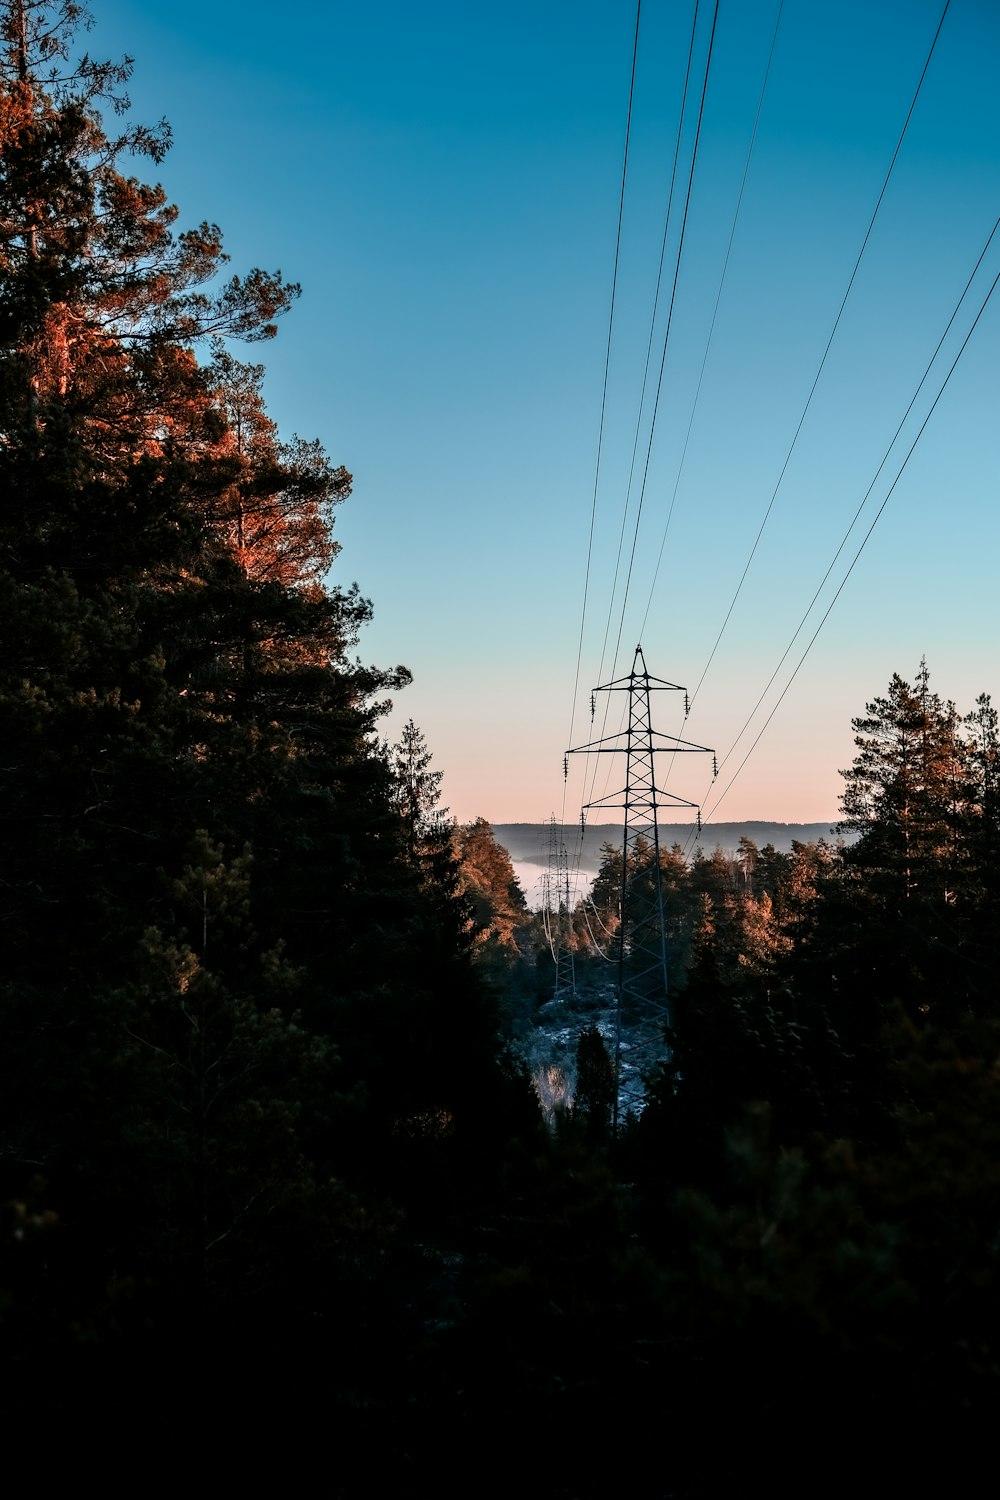 a view of a forest with power lines above it